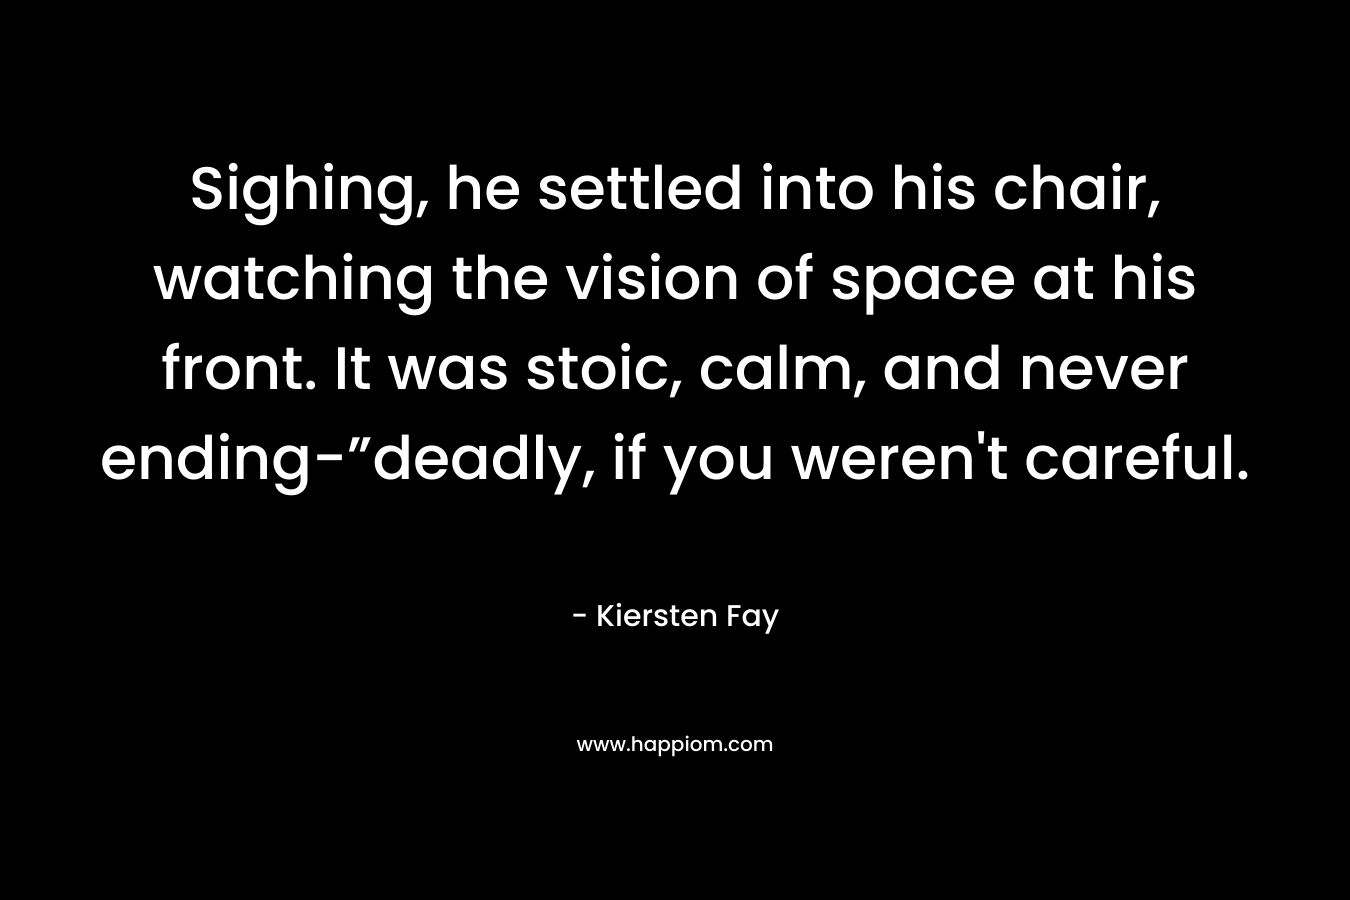 Sighing, he settled into his chair, watching the vision of space at his front. It was stoic, calm, and never ending-”deadly, if you weren’t careful. – Kiersten Fay